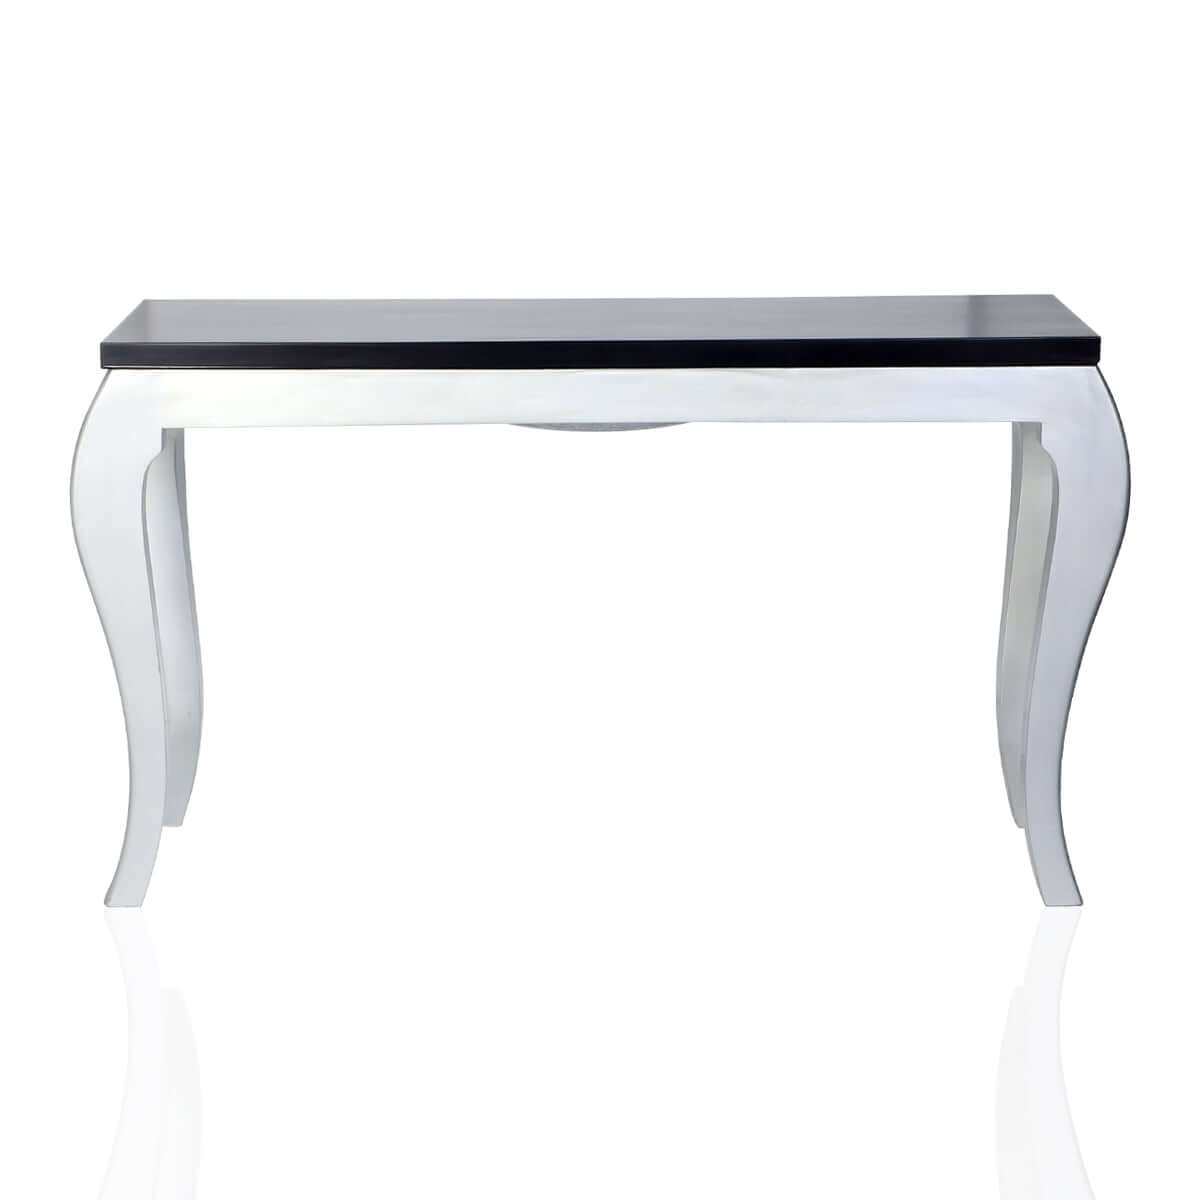 Regat Solid Wood Console Table (Silver Brown)